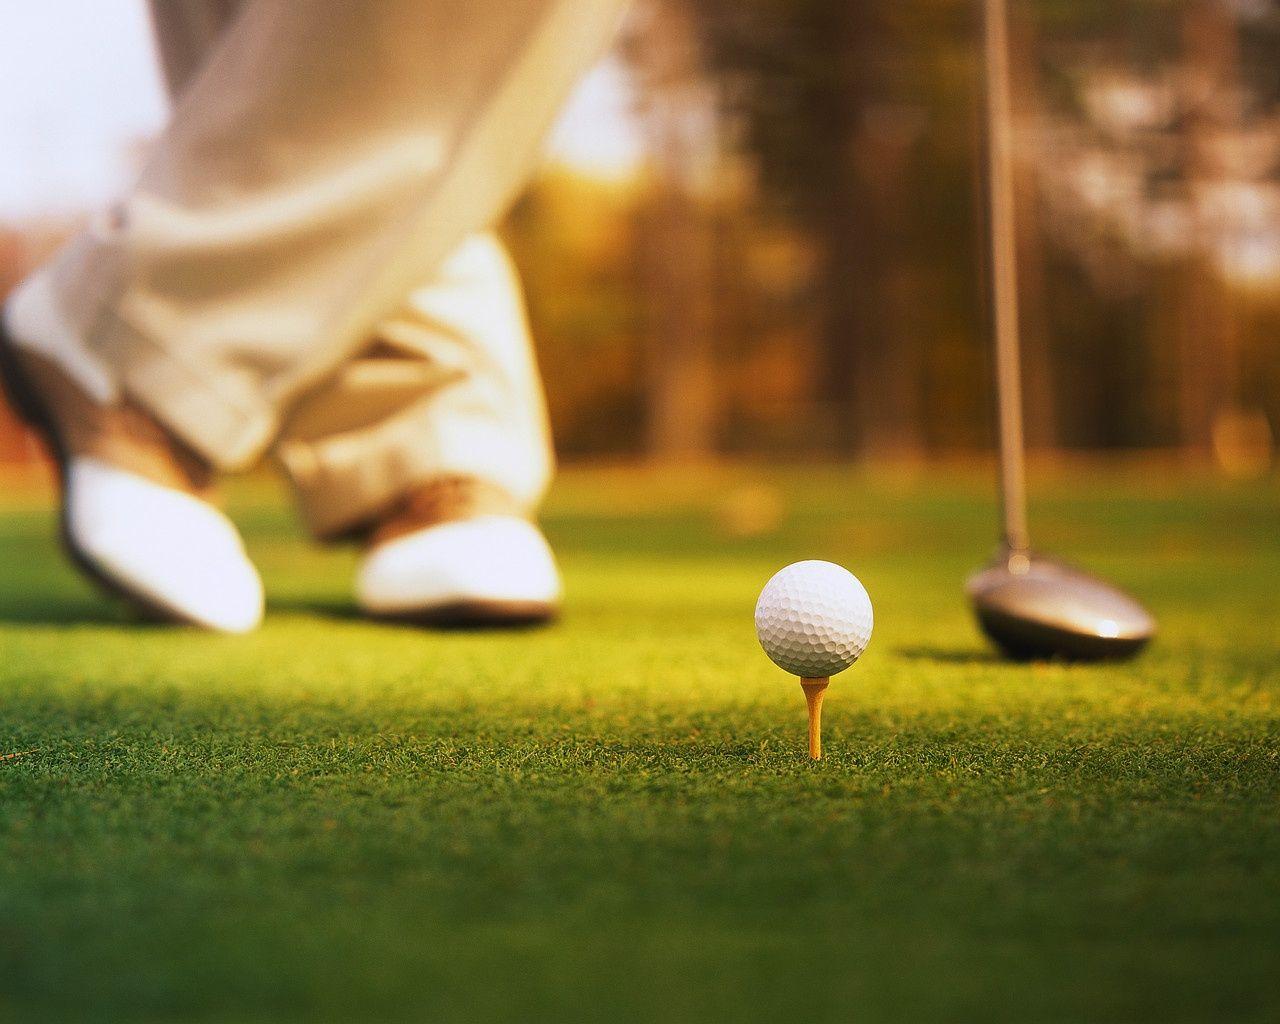 Golfer stands next to a golf club and a ball resting on a golf tee.